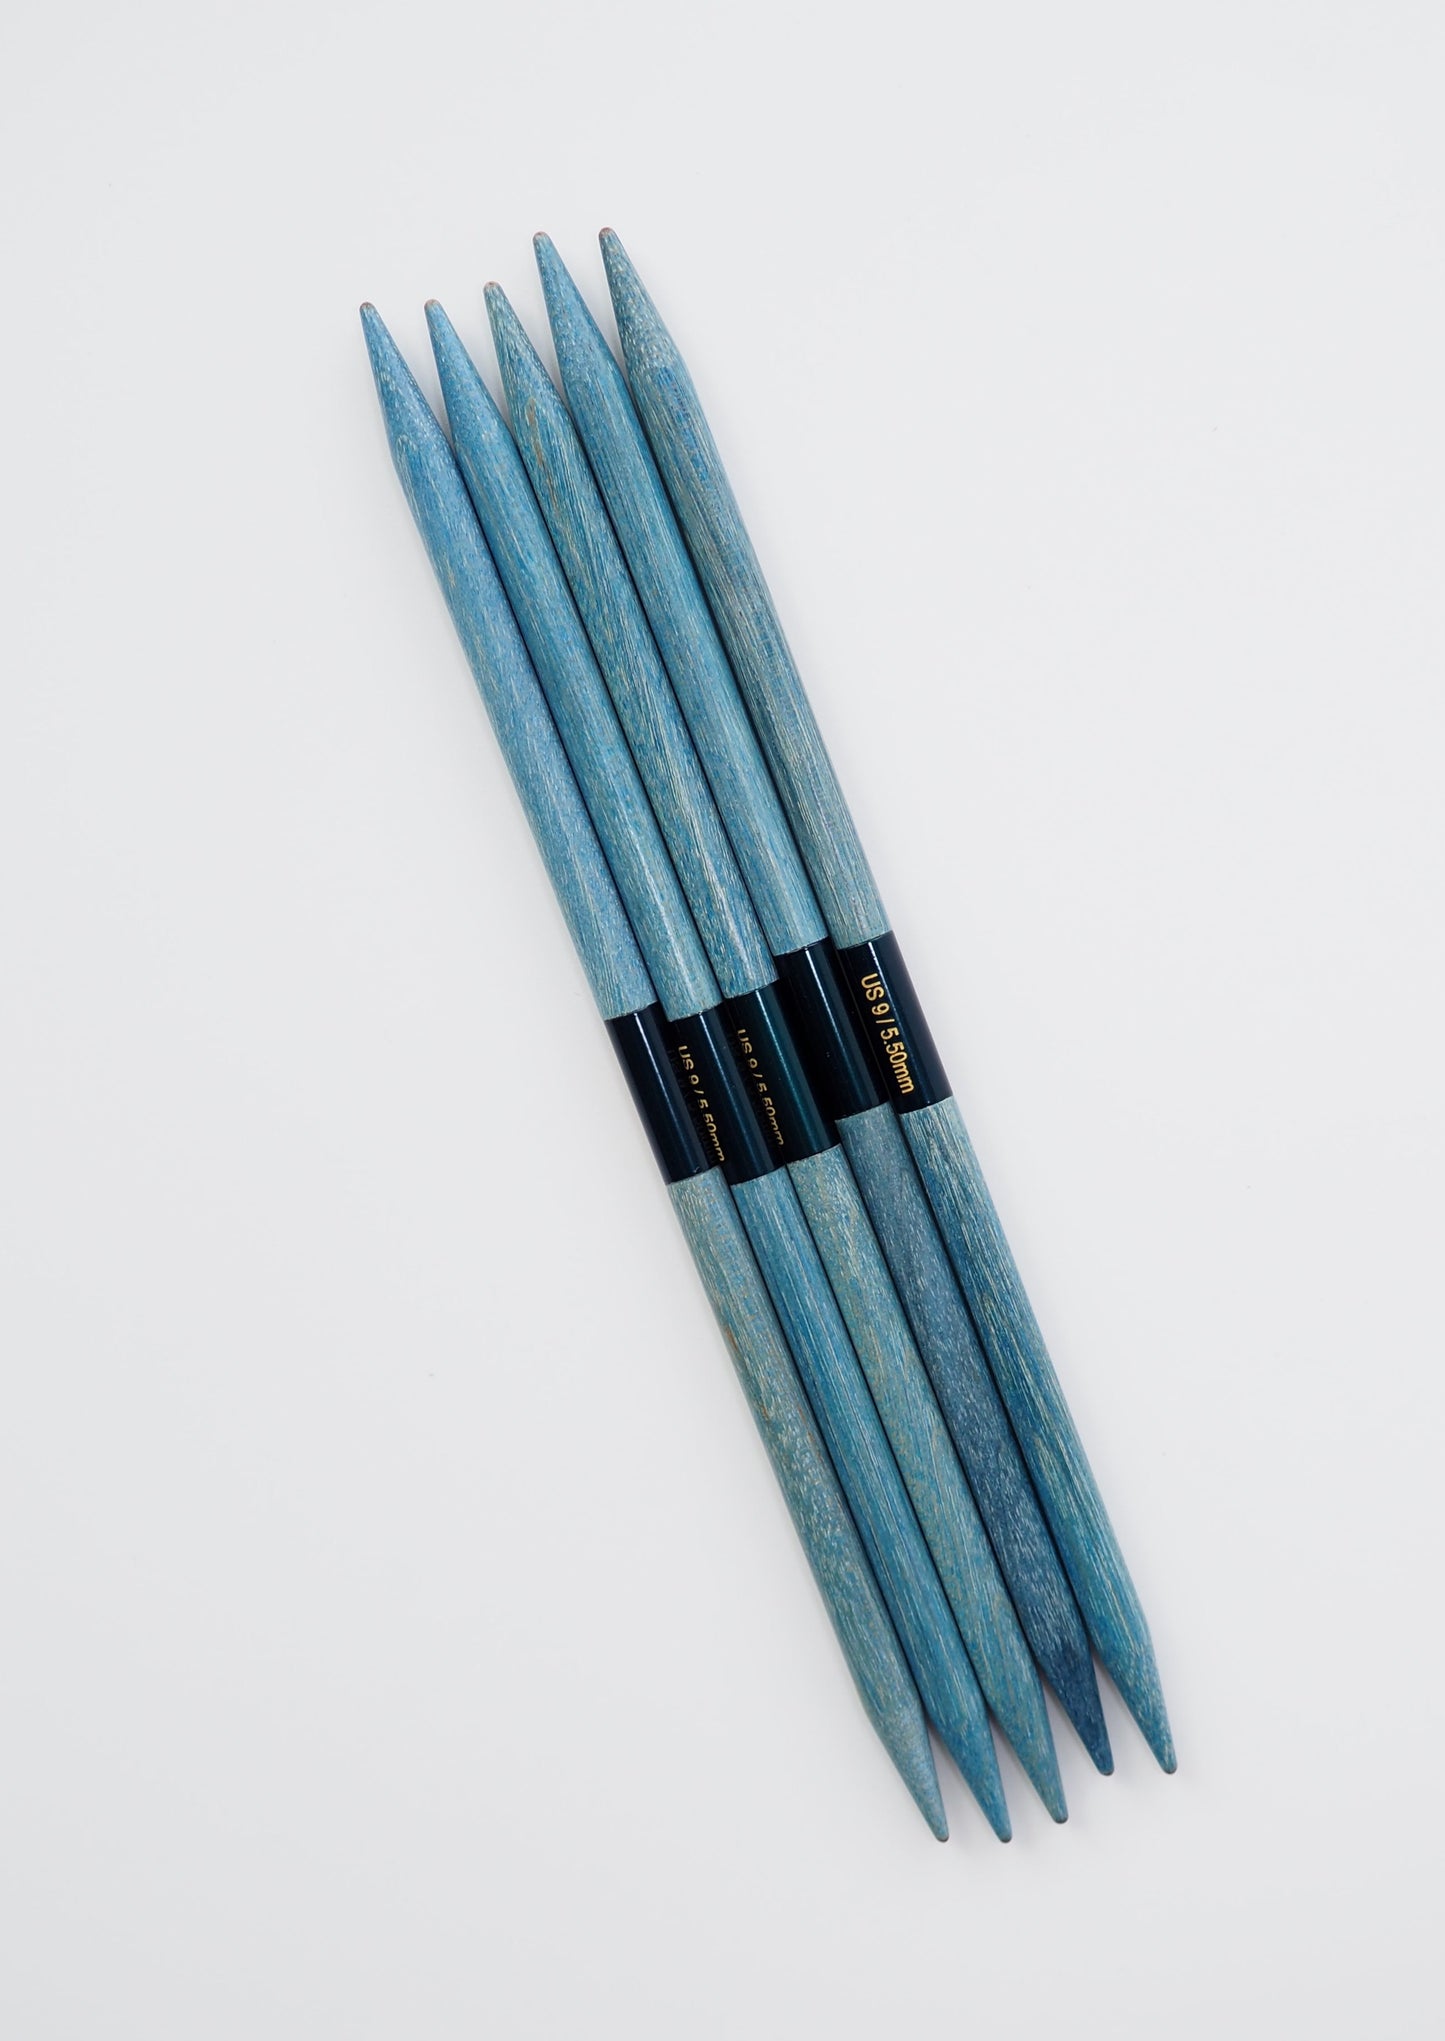 an image of "Lykke Indigo 6" Double Pointed Needles". the images shows 5 blue wooden double pointed needles in size 5.5mm against a white background